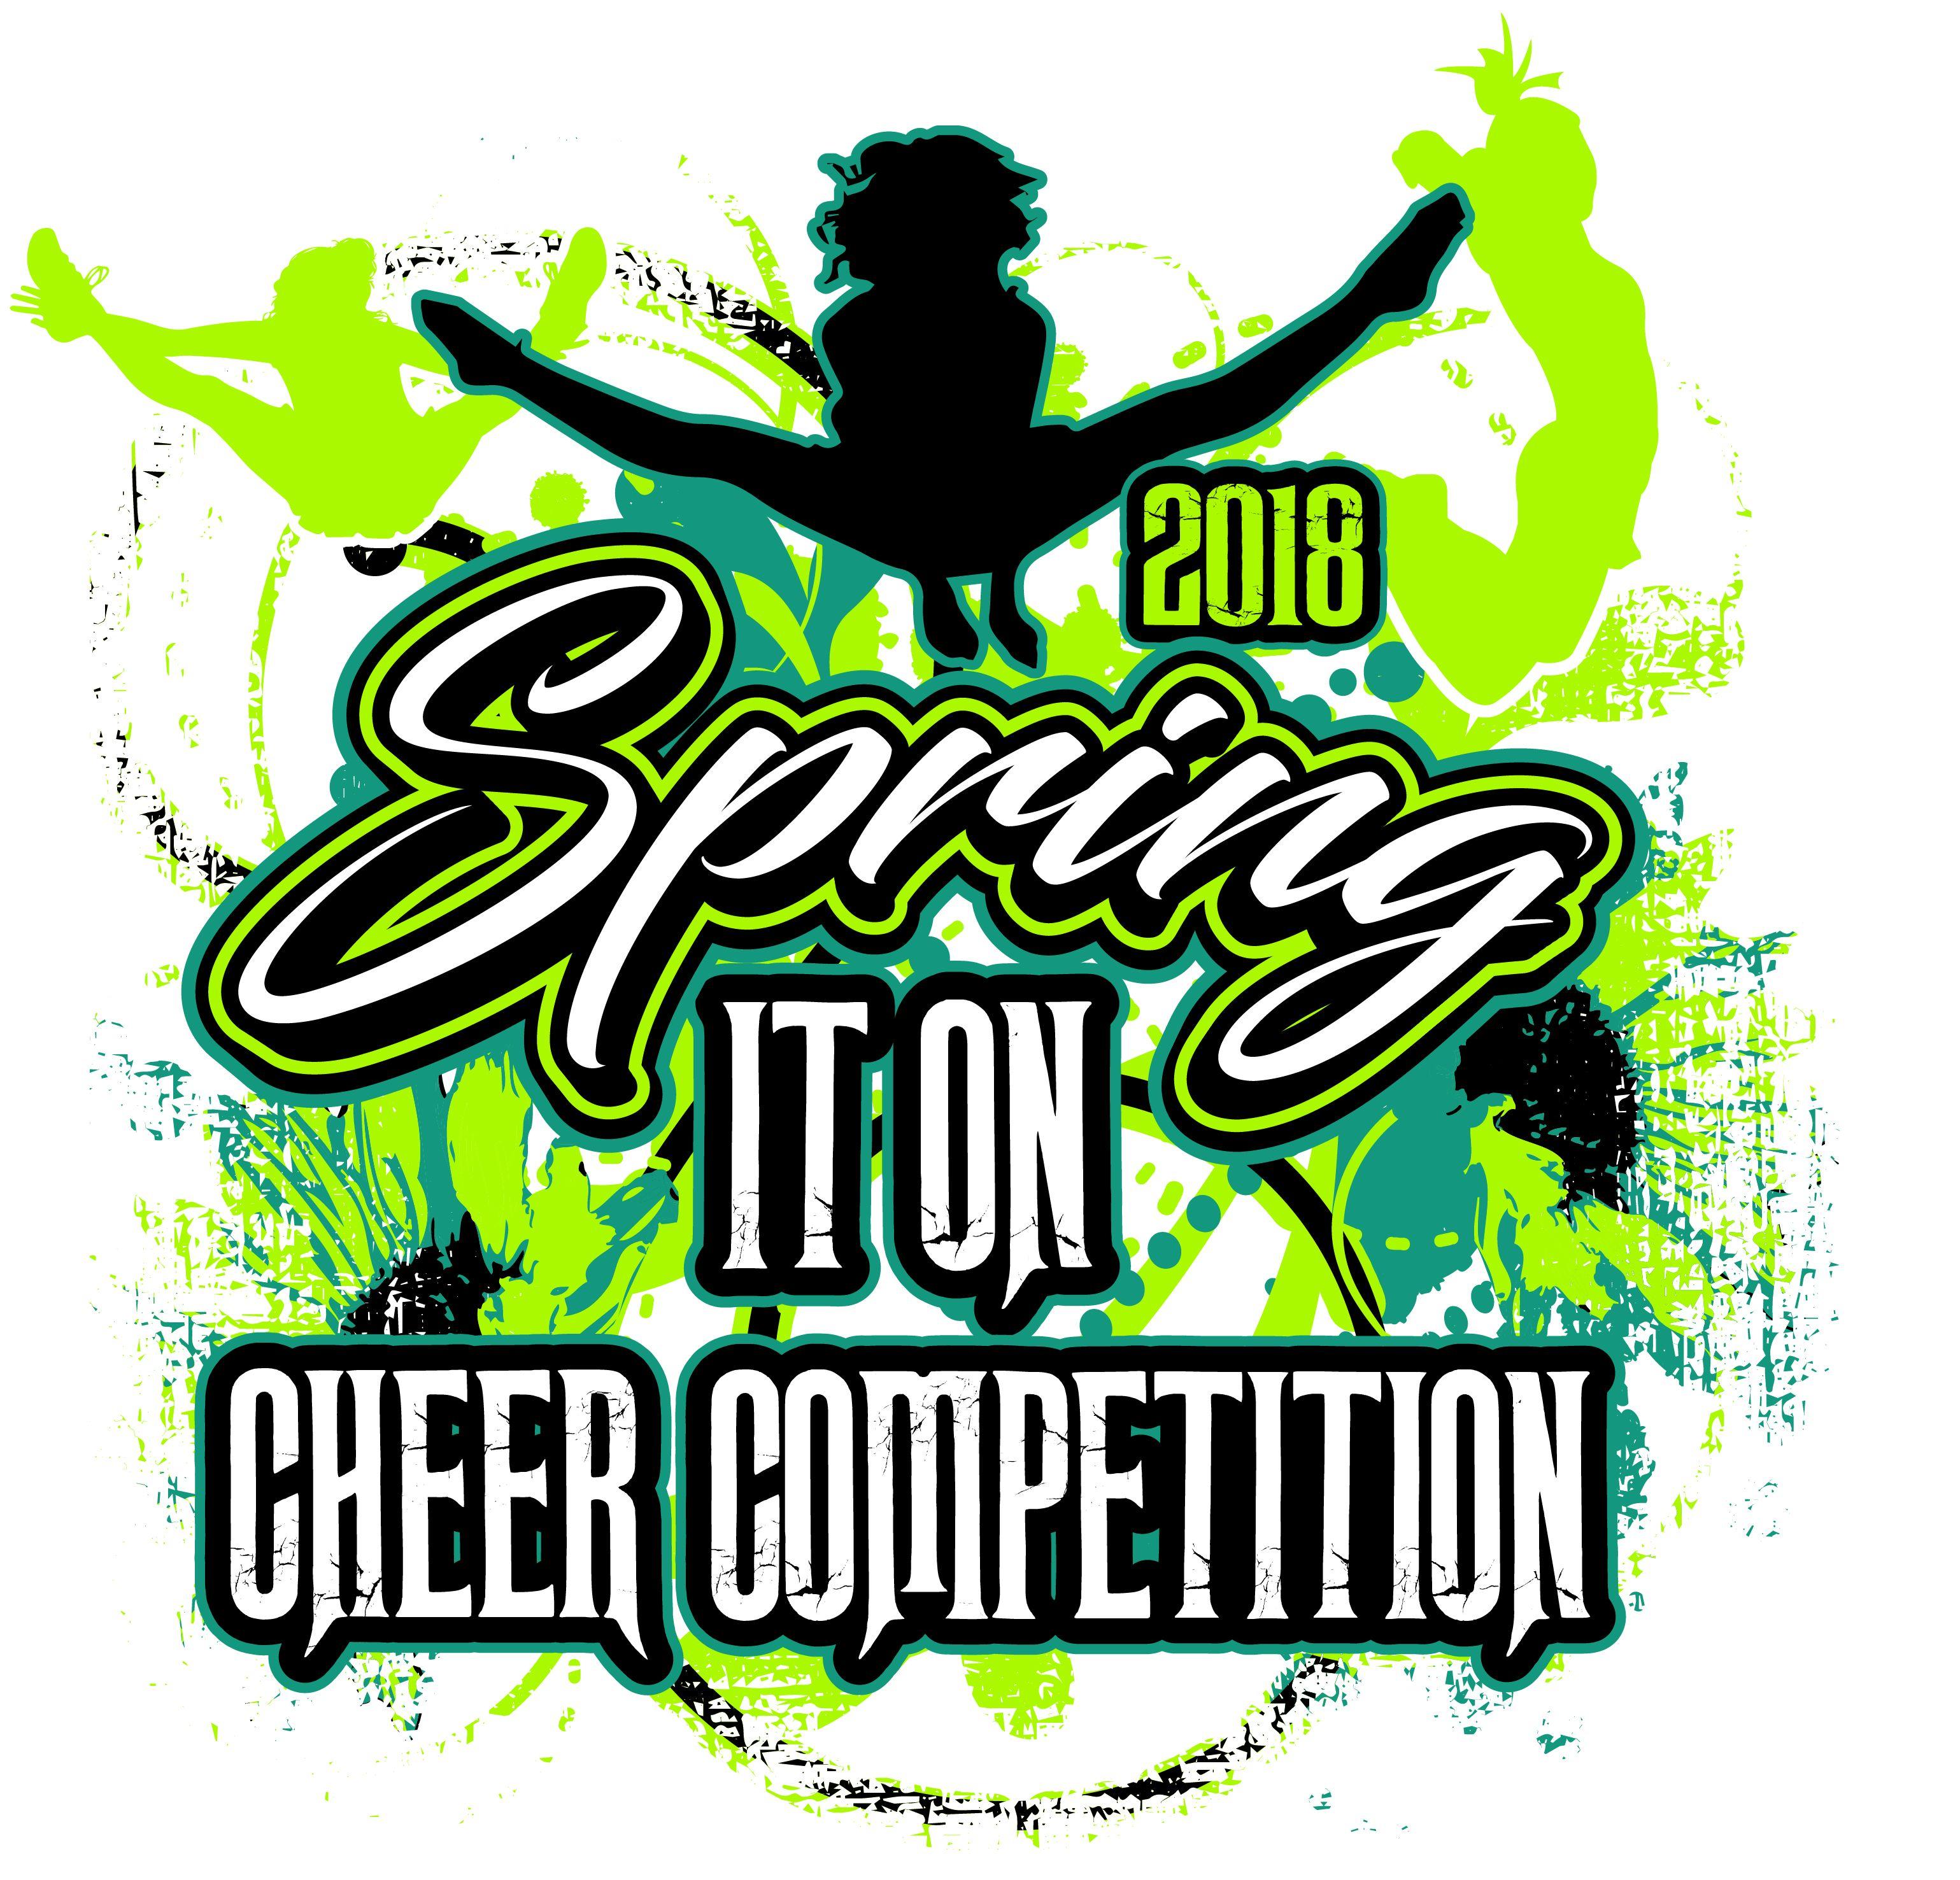 Google Competition 2018 Logo - SPRING IT ON CHEER COMPETITION 2018 t-shirt vector logo design for ...